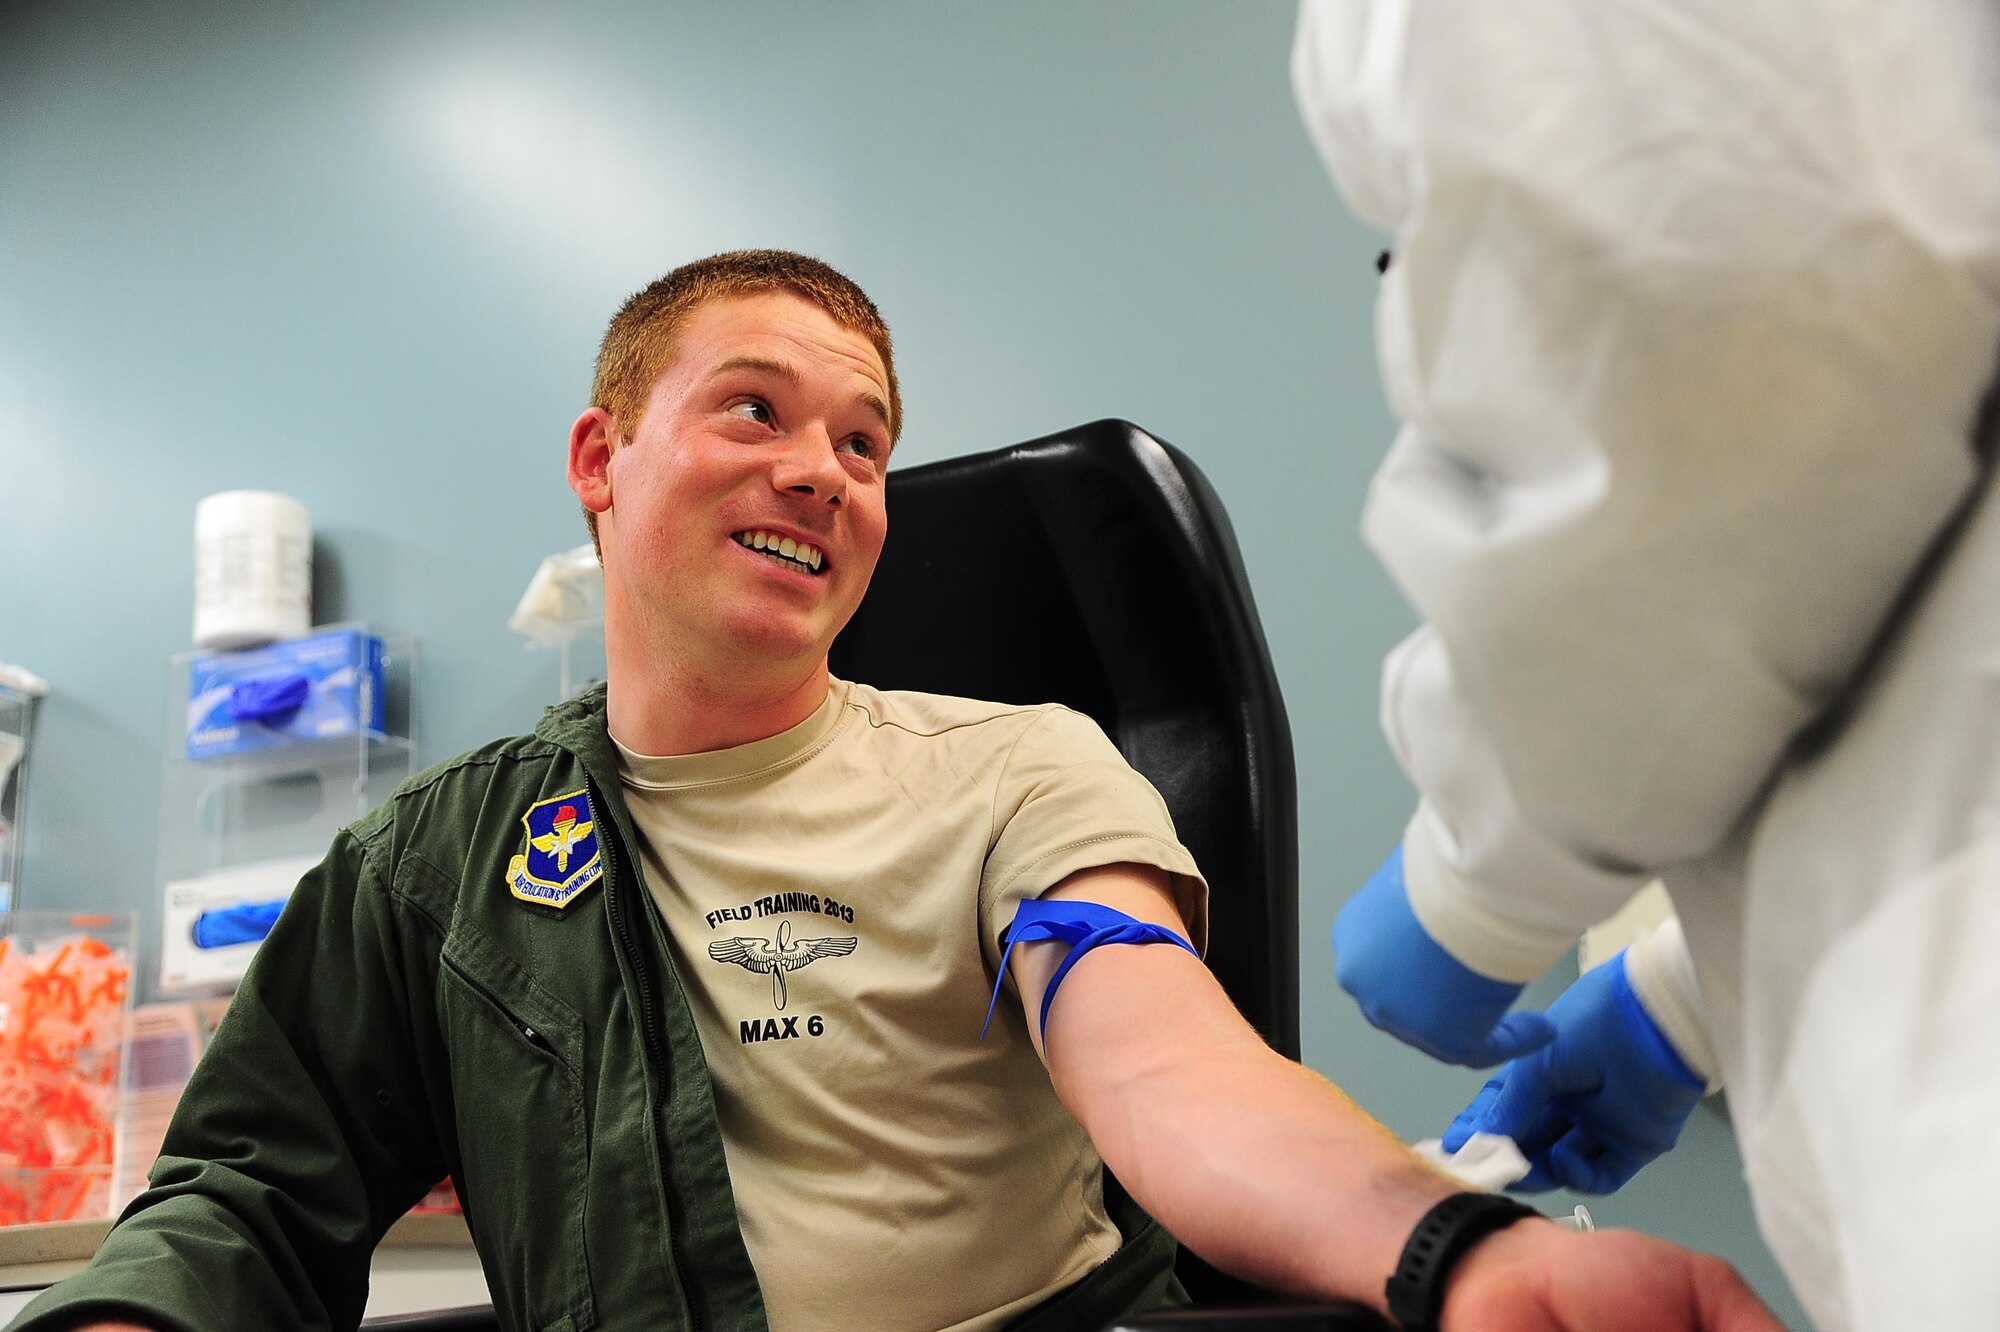 Second Lt. Patrick Finn, 14th Student Squadron Student Pilot, prepares to give a blood sample May 22, 2017, at Columbus Air Force Base, Mississippi. The lab technicians do their best to keep patients calm and relaxed while taking blood samples. (U.S. Air Force photo by Airman 1st Class Beaux Hebert)